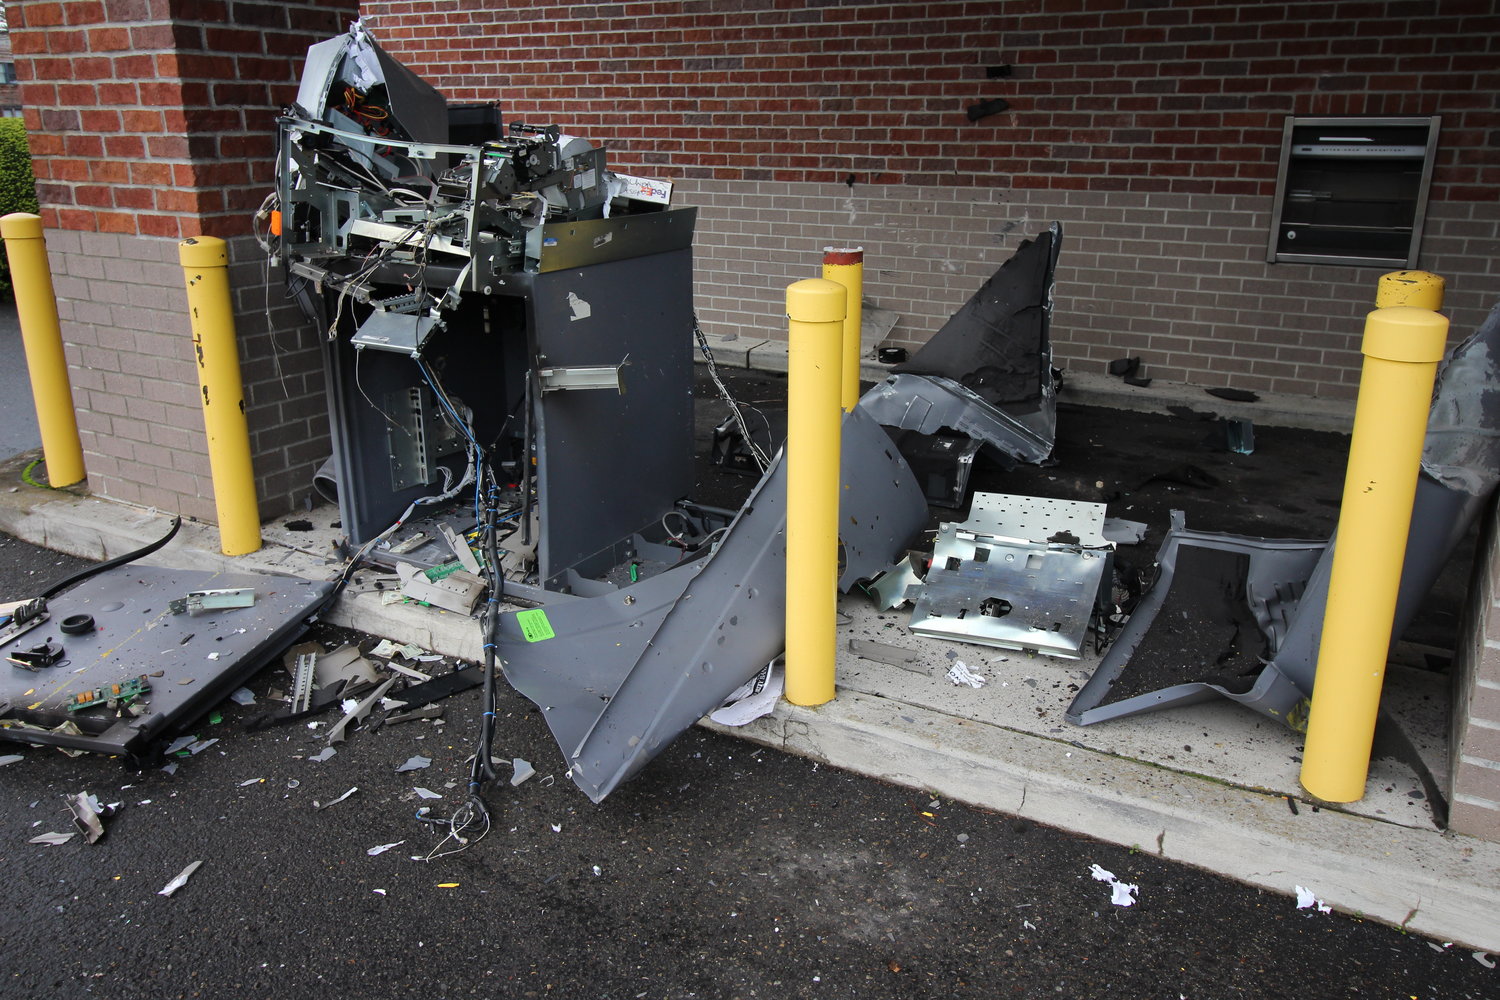 The Centralia Police Department on Monday released photographs of the suspects in a Sunday morning explosion that destroyed an ATM on South Tower Avenue in Centralia. 

An image of the suspects’ vehicle was also released. The suspects were driving a late 1990s or early 2000s light colored four-door Honda Accord. 